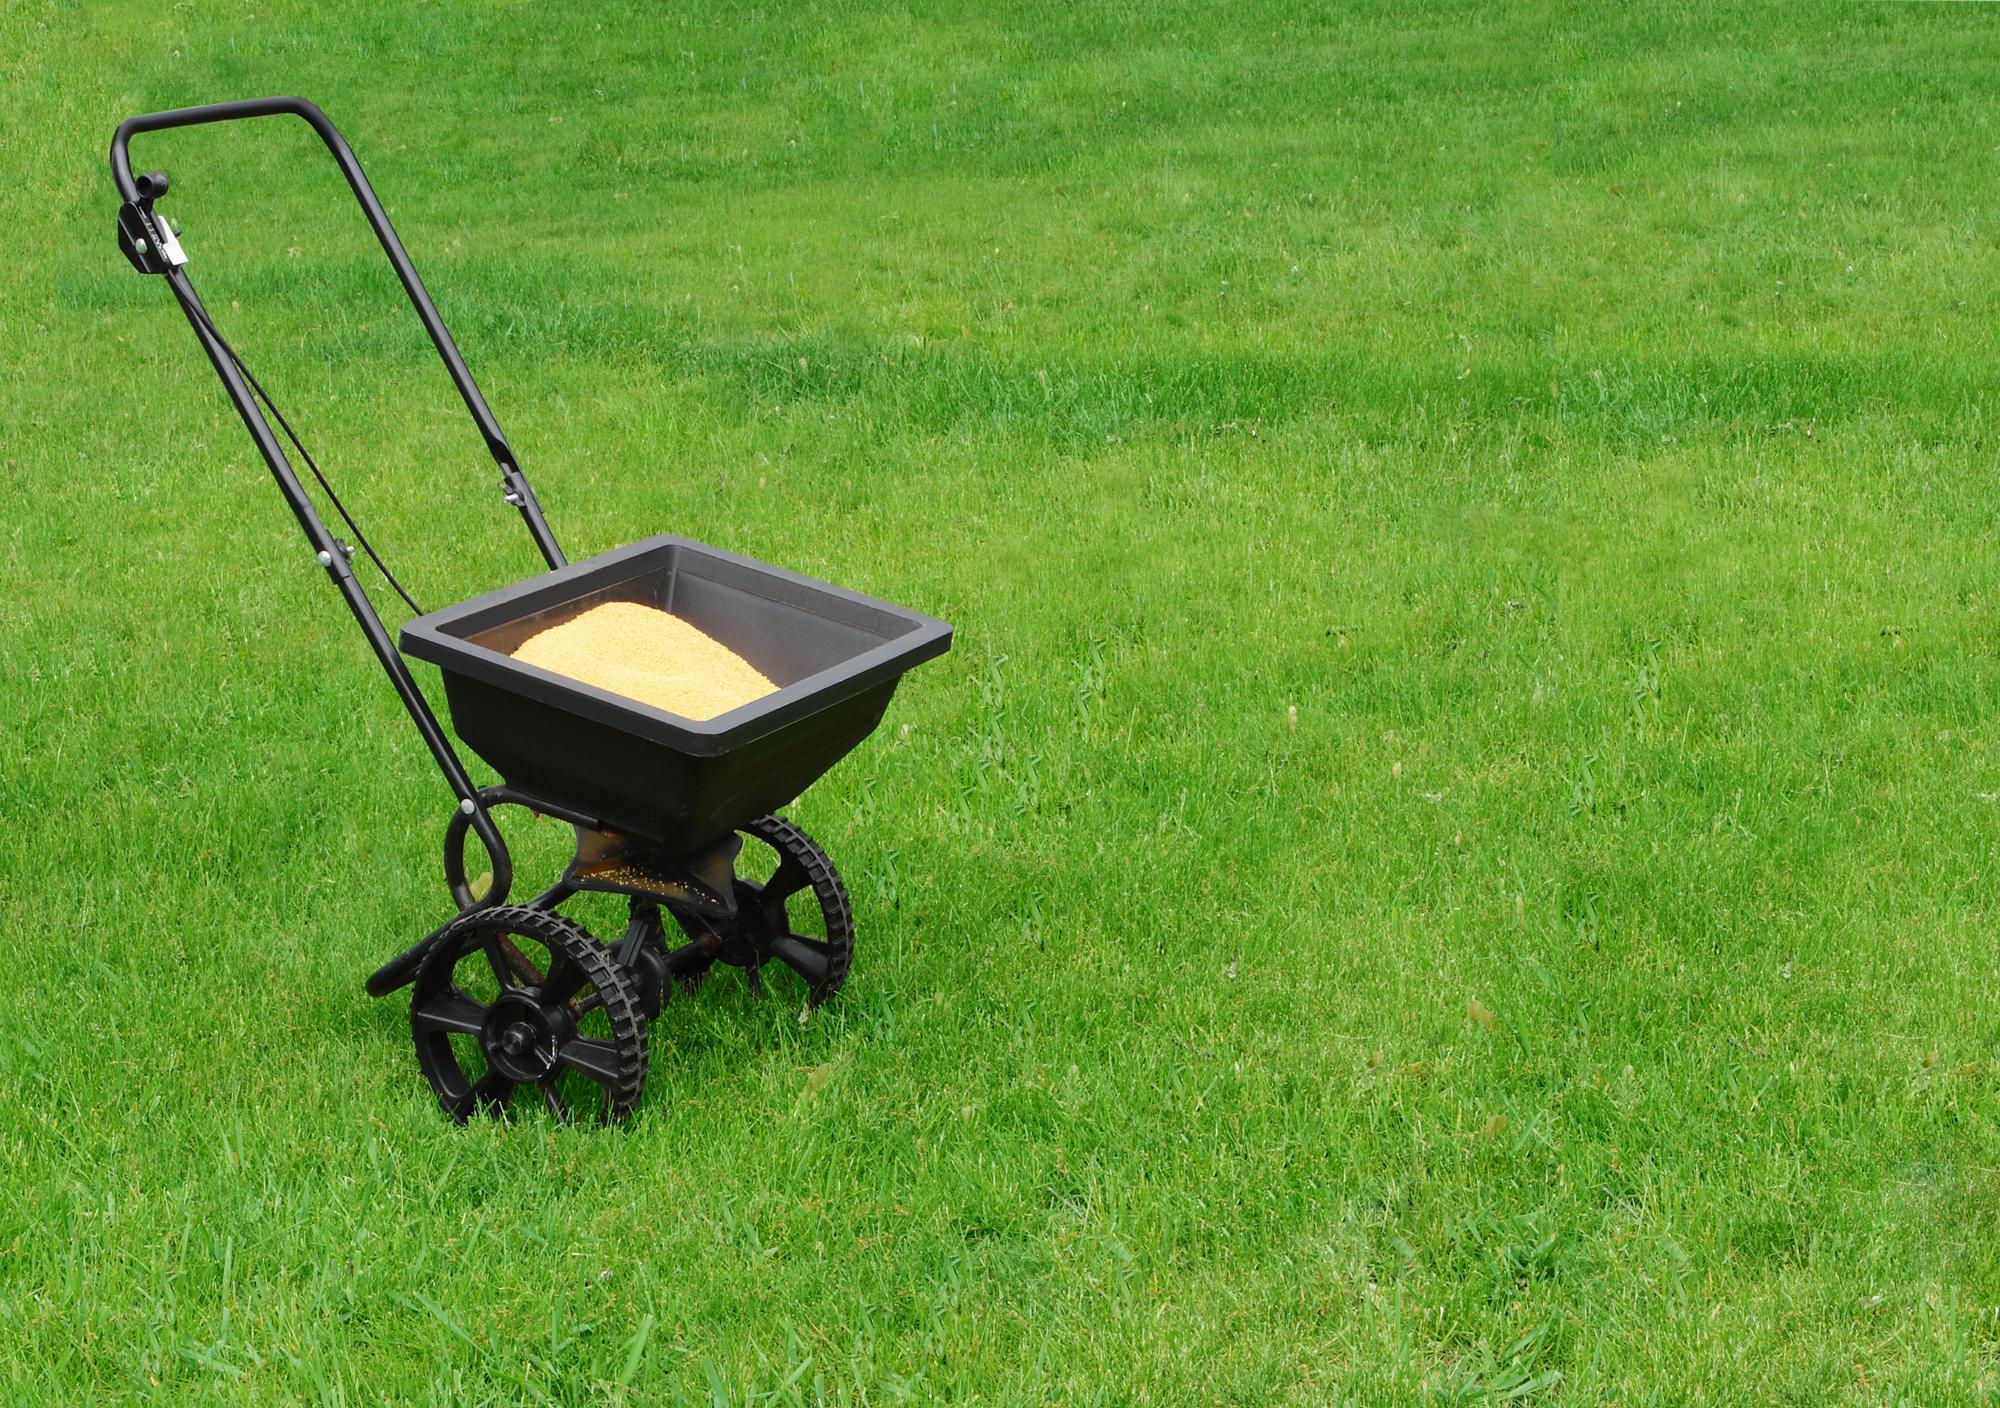 A fertilizer spreader is a box-shape container mounted on two wheels; a handle is attached for pushing the spreader across grass.